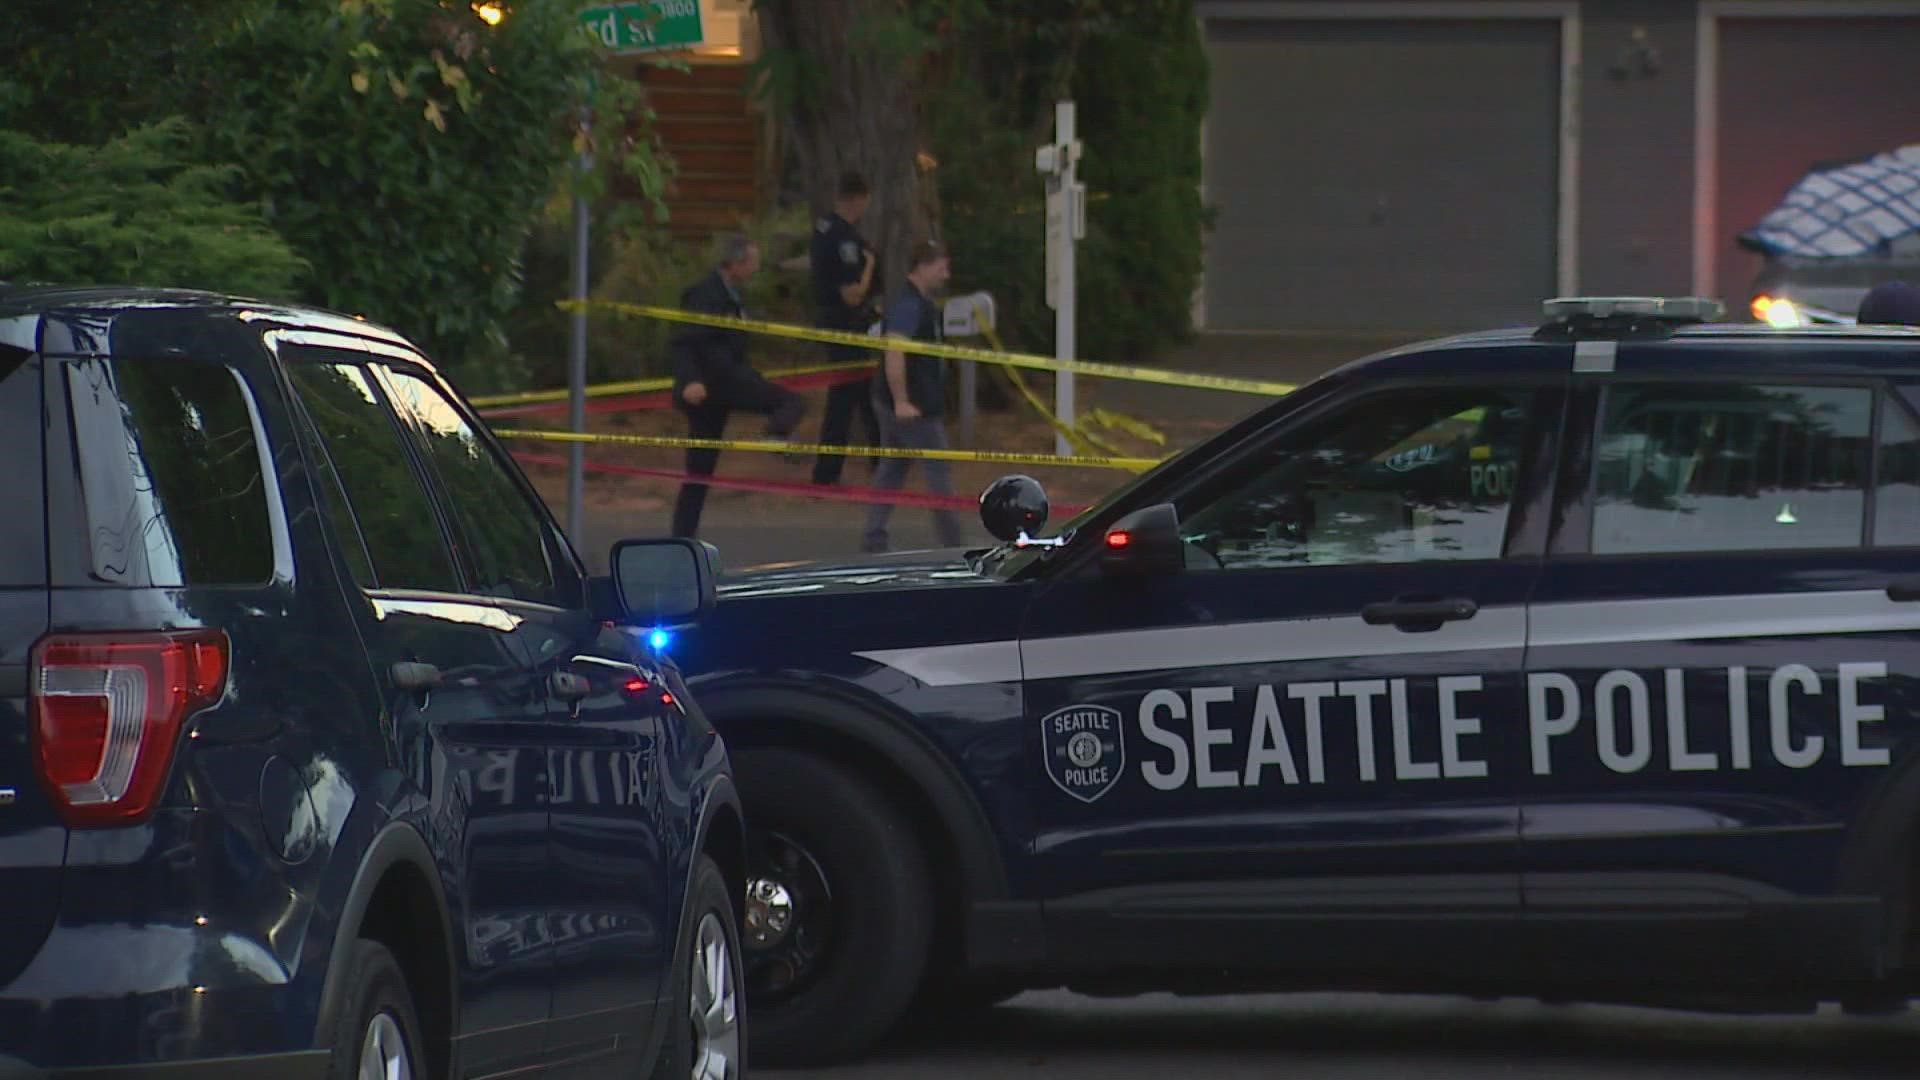 Seattle police are actively investigating.